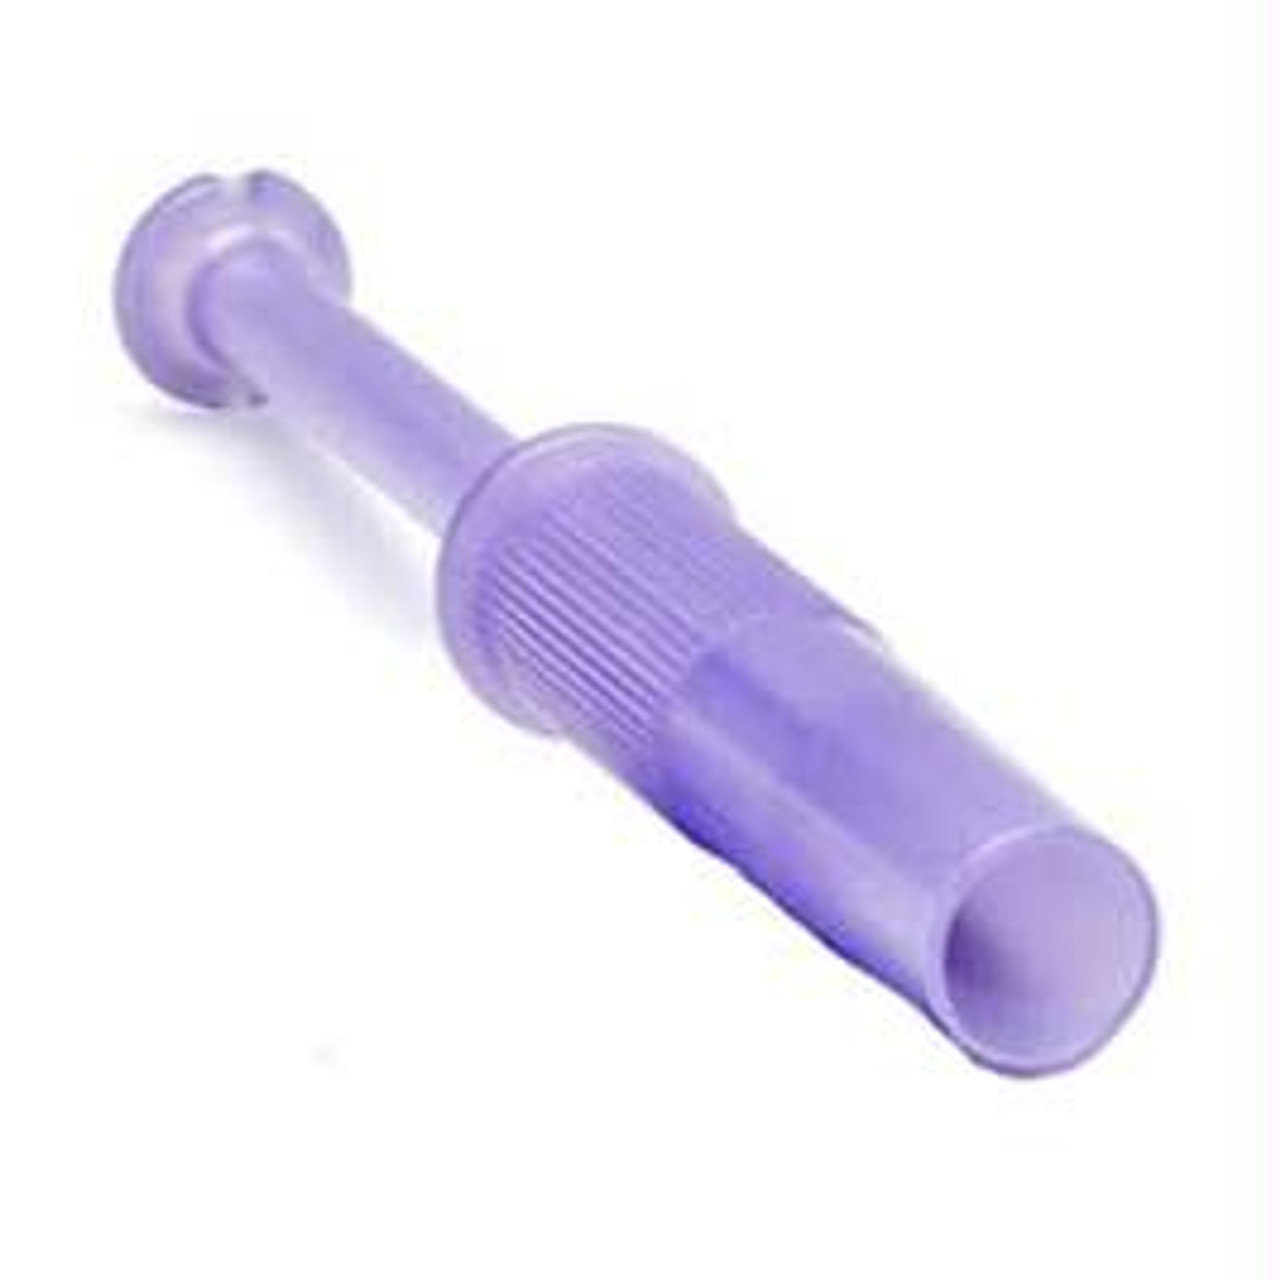 Sephure Rectal Suppository Applicator, Applicator Size A2 photo